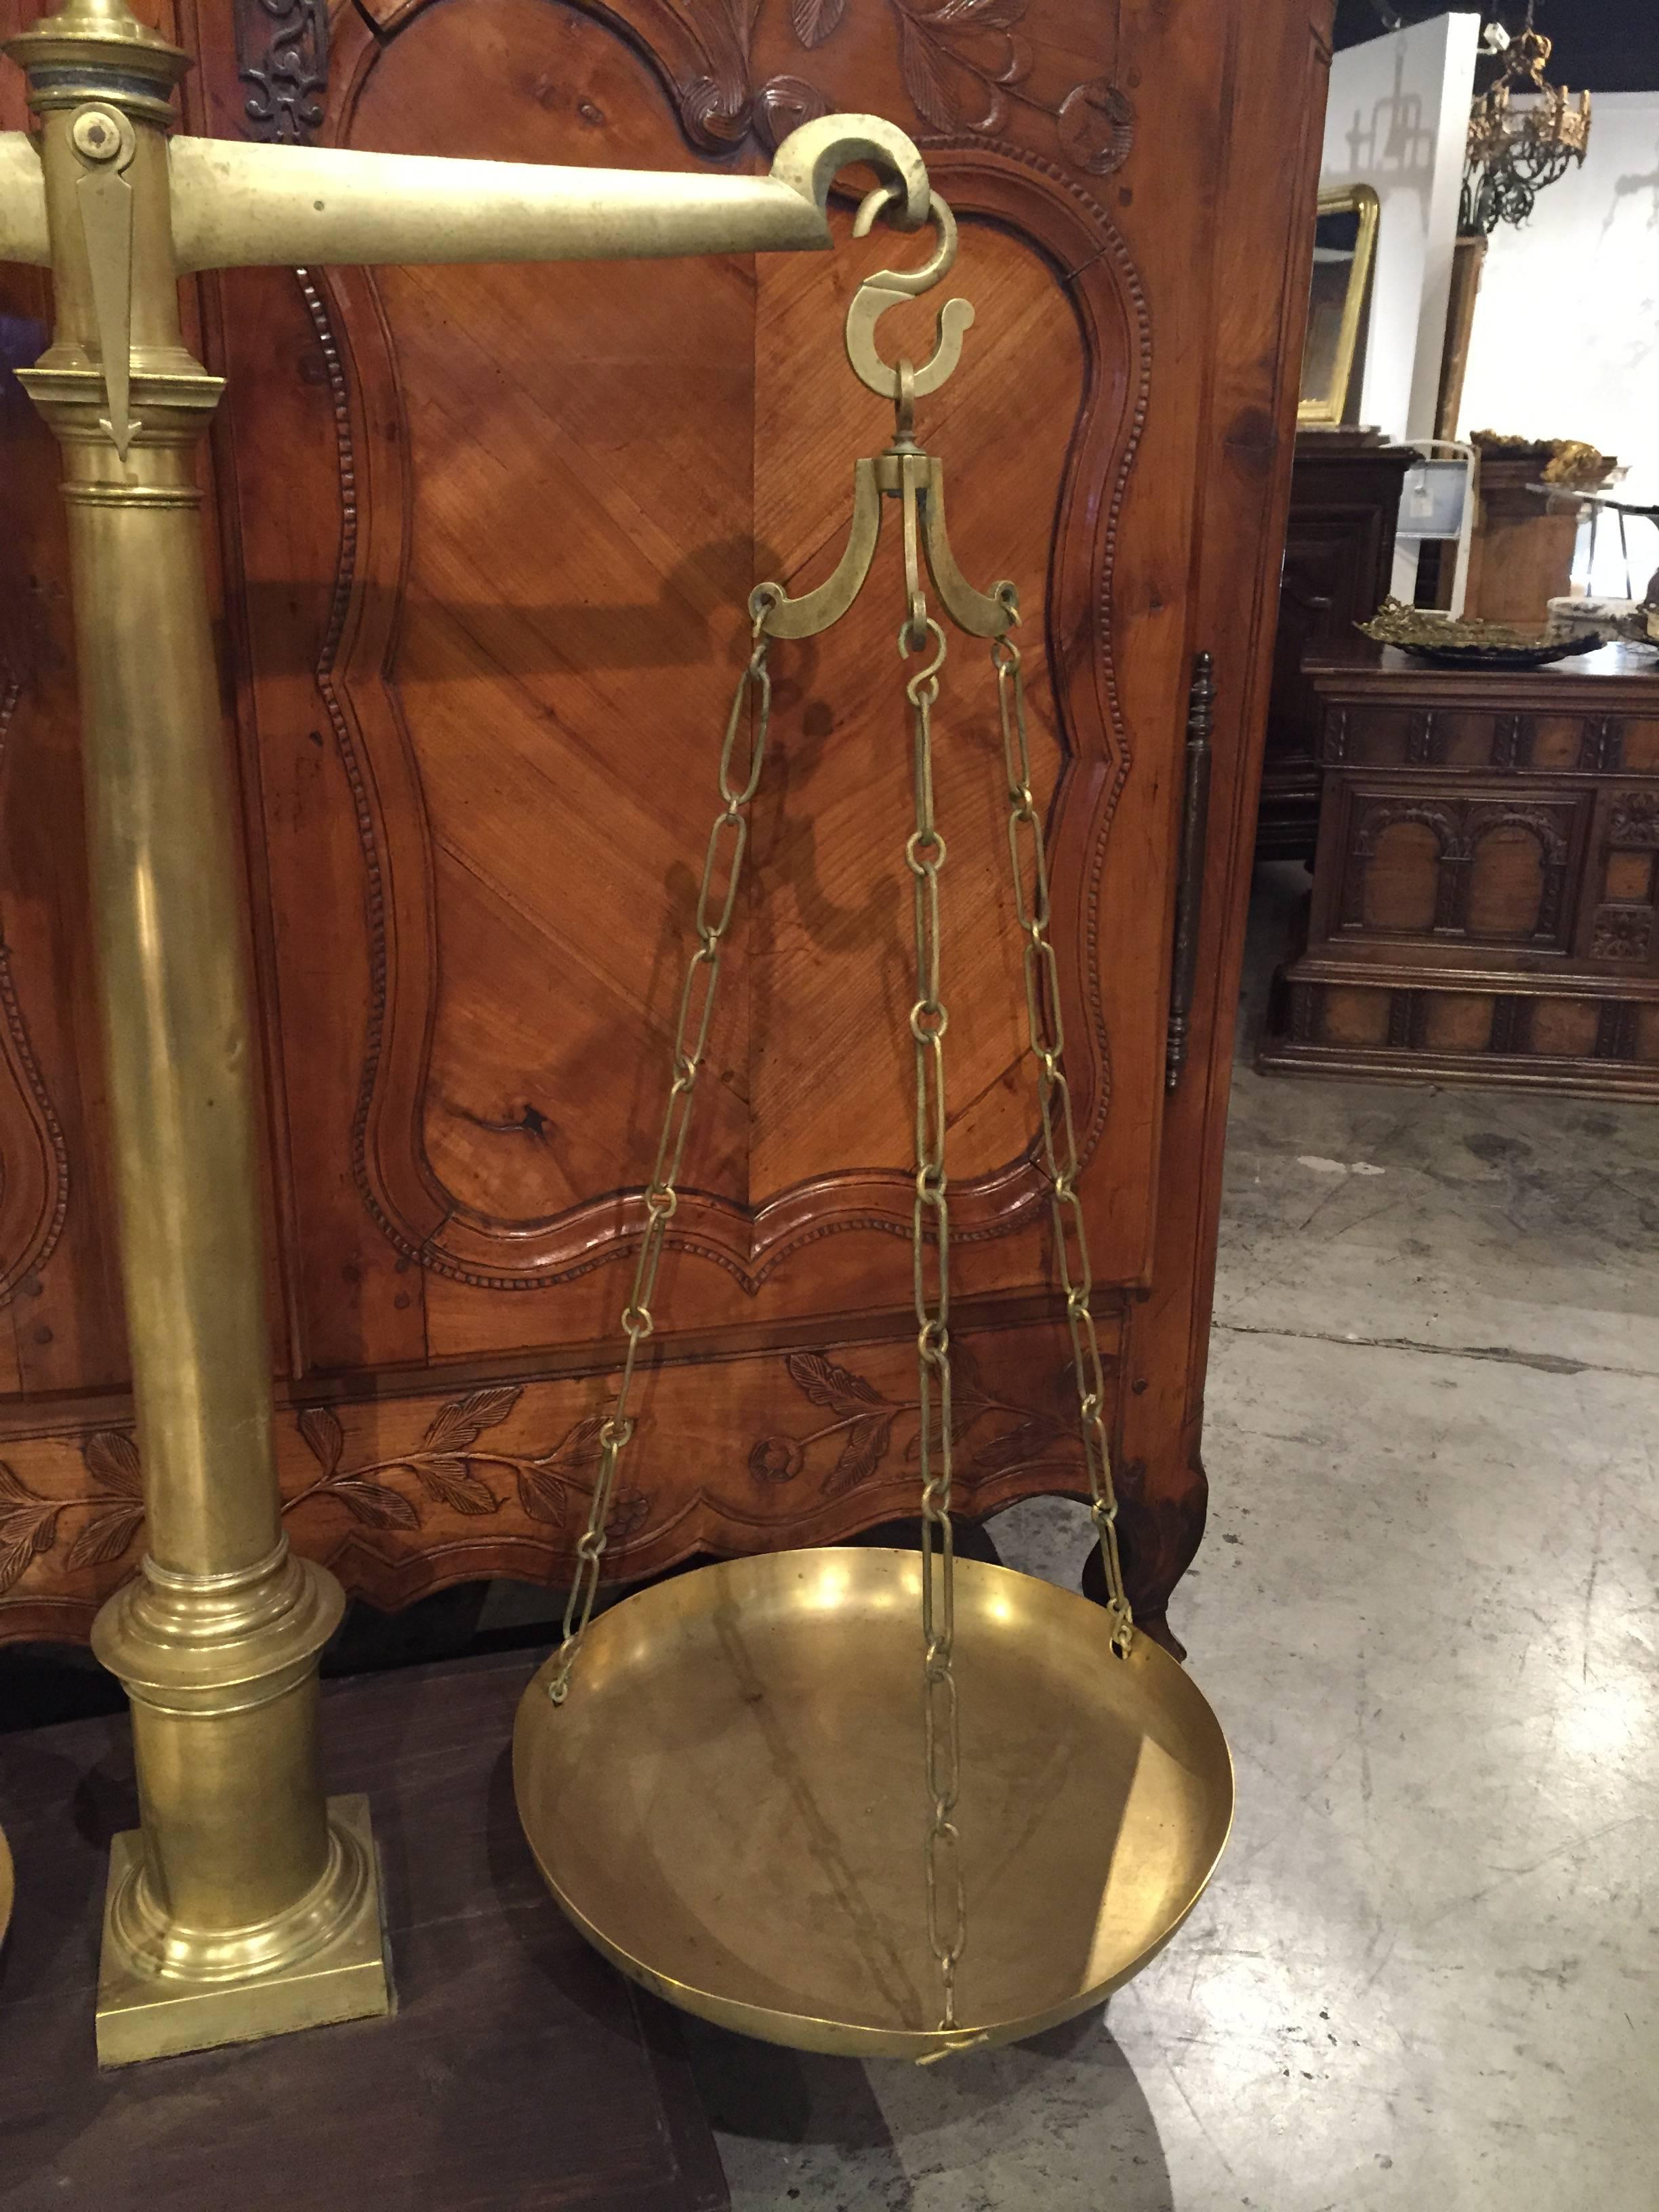 This large-scale was typical of the scales that pharmacists used in France in the 1800s. By removing the top piece, and inspecting the arm of the scale, you can see imprinted: LAMARE, R Dufour St Germain 24 Paris. The top has a ball finial with a